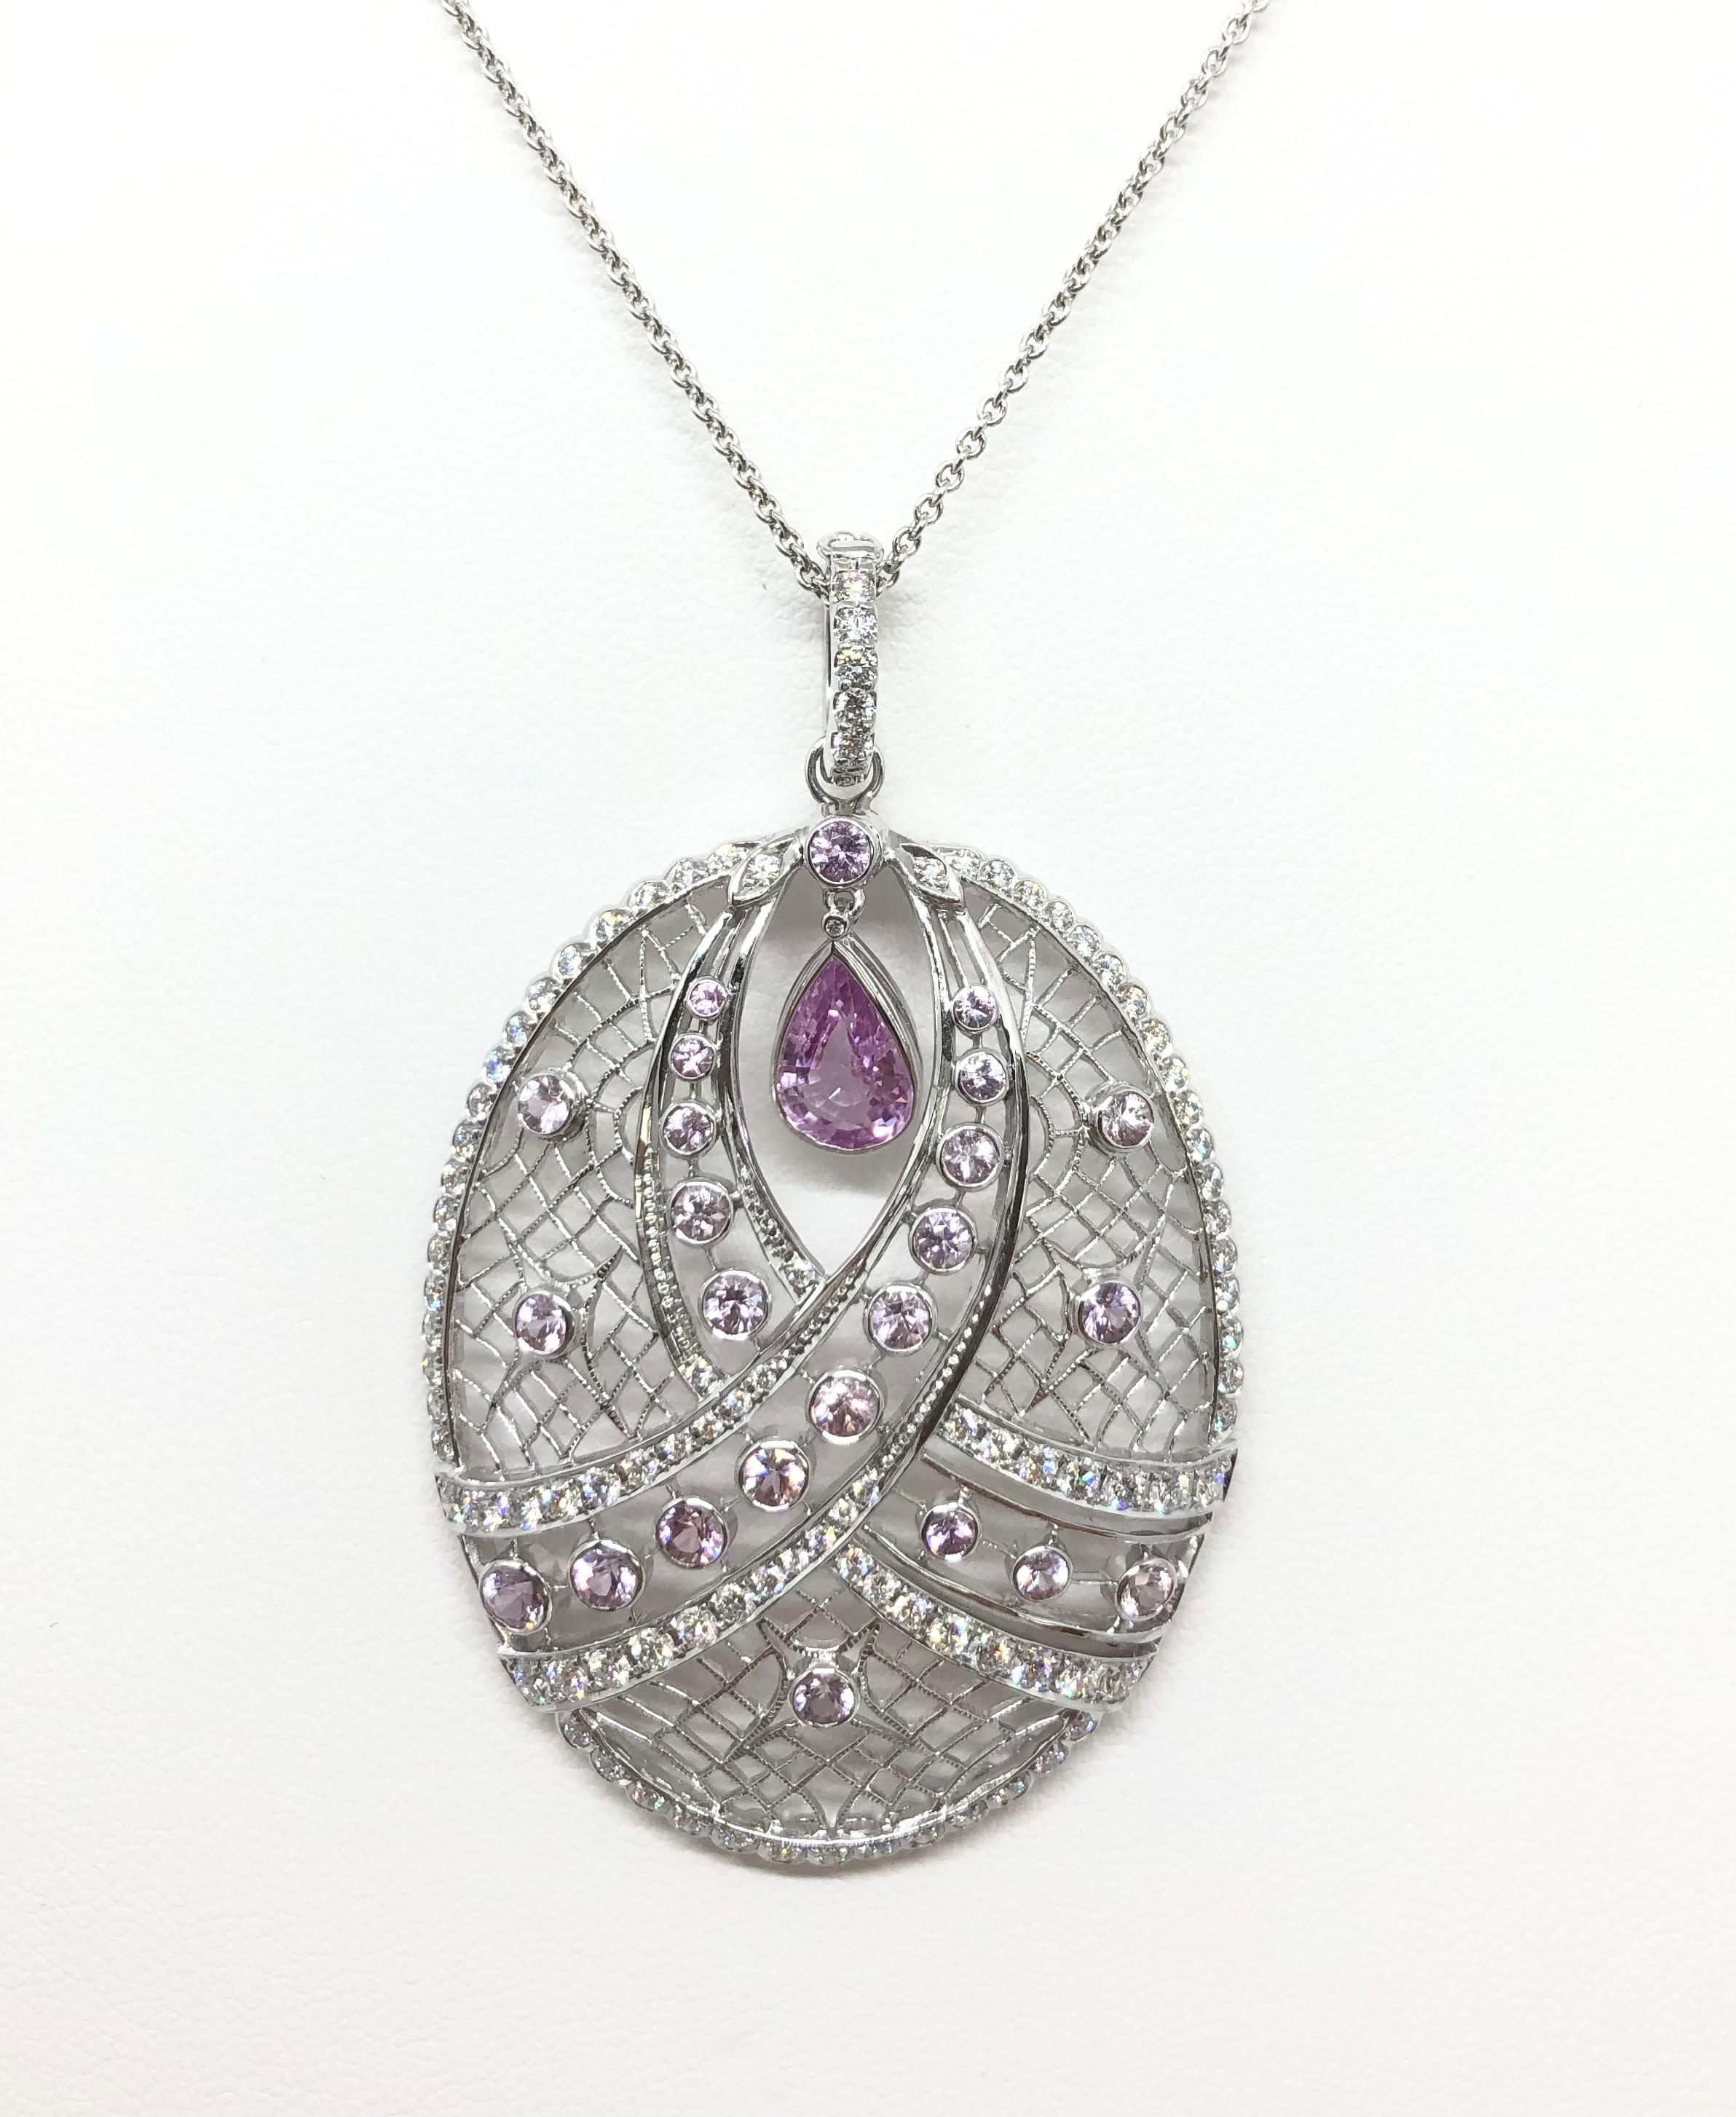 Pink Sapphire 1.65 carats, Pink Sapphire 1.89 carats and Diamond 1.26 carats Pendant set in 18 Karat White Gold Settings
(chain not included)

Width: 3.6 cm 
Length: 5.8 cm
Total Weight: 13.64 grams

